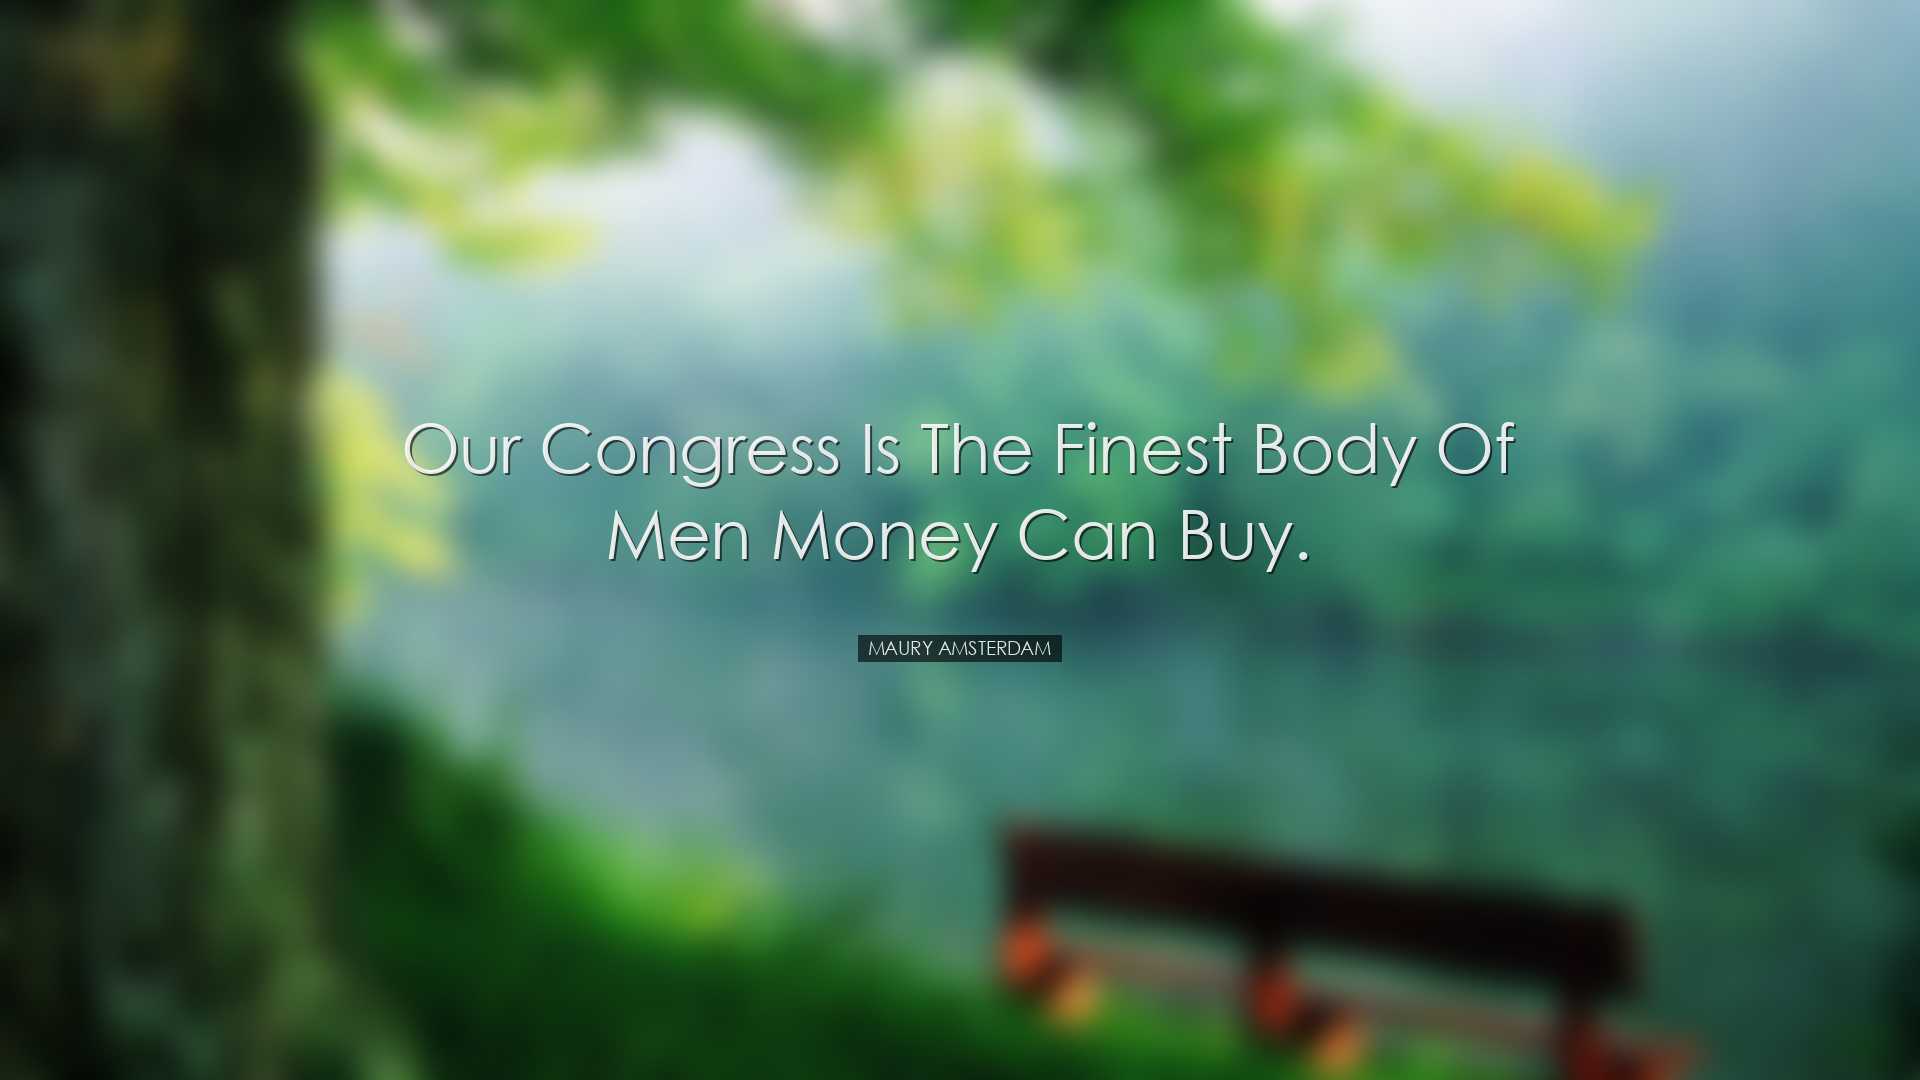 Our Congress is the finest body of men money can buy. - Maury Amst